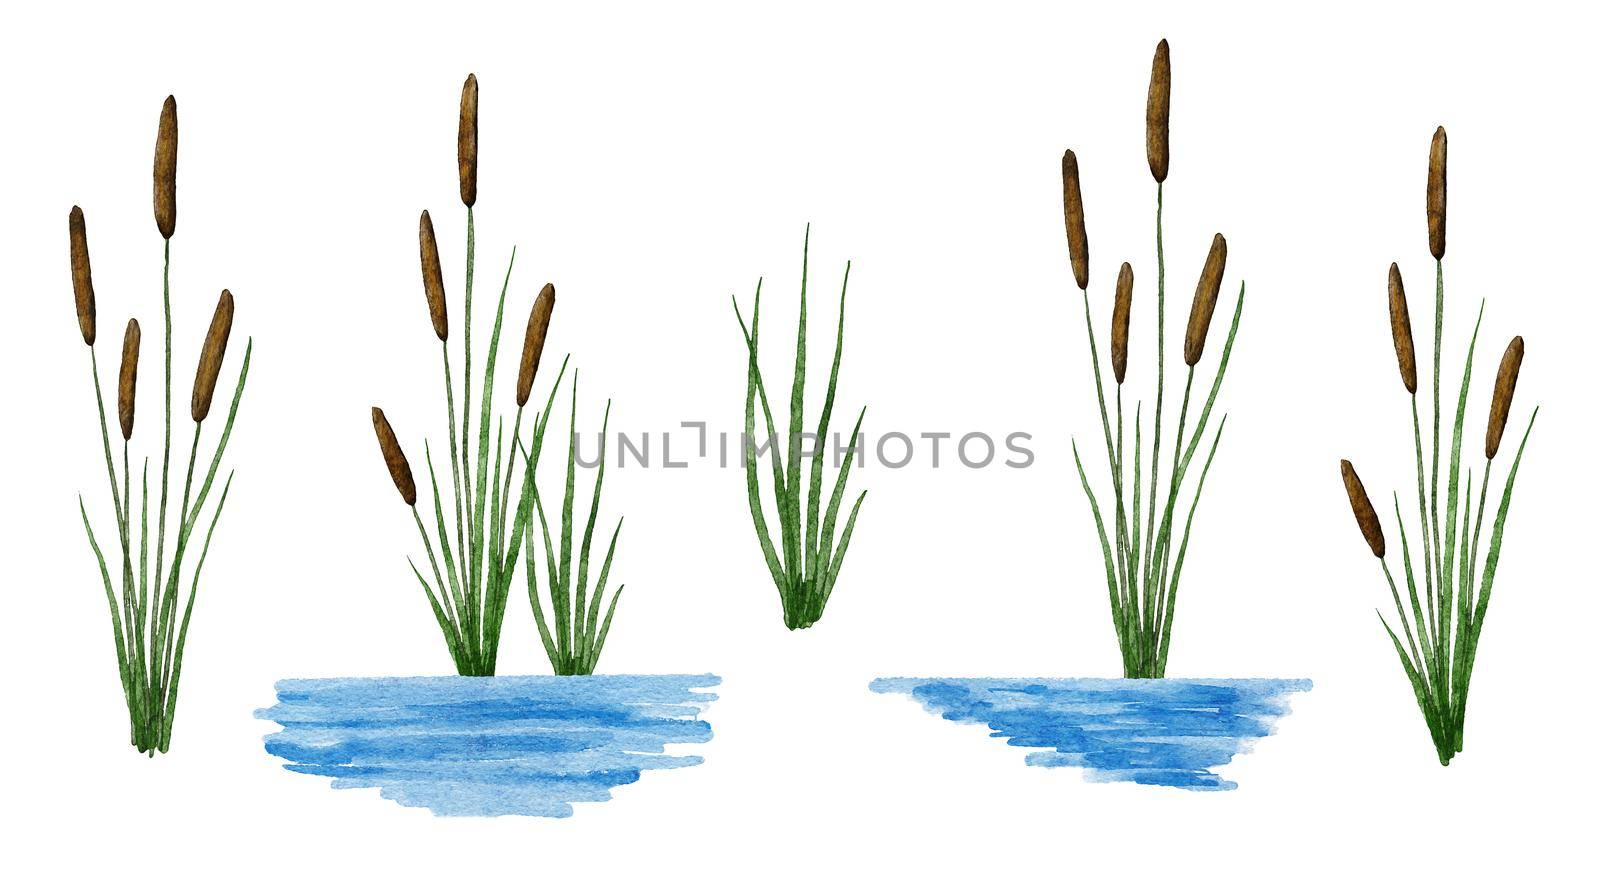 Watercolor hand drawn illustration of typha reed cattail plant in water river. Flora of wetland swamp march, green leaves brown seeds, outdoor summer spring floral landscape. by Lagmar